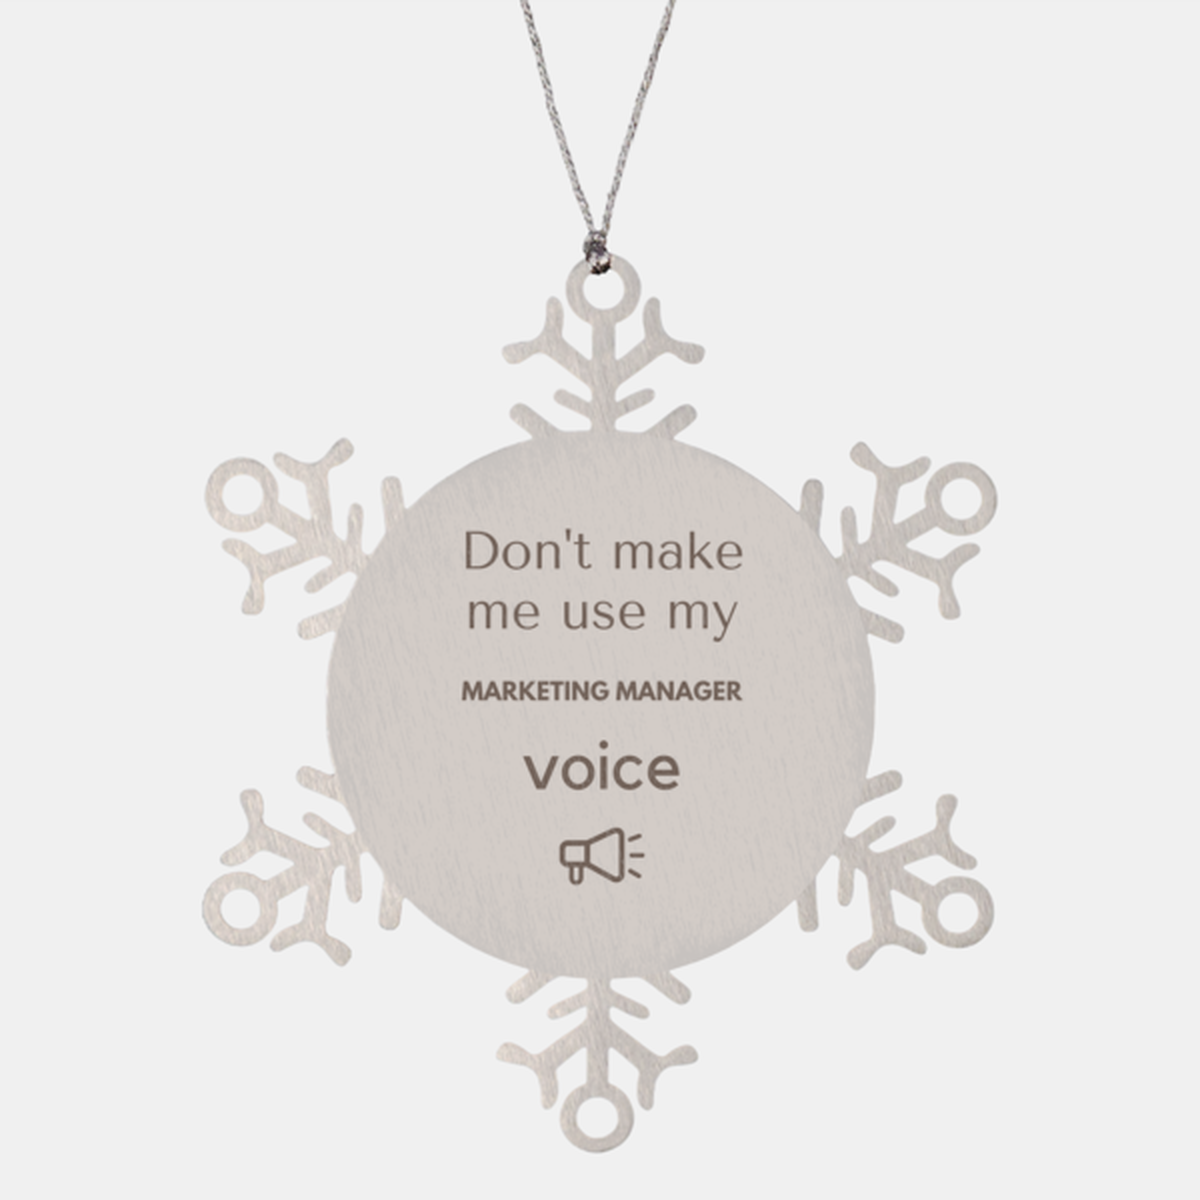 Don't make me use my Marketing Manager voice, Sarcasm Marketing Manager Ornament Gifts, Christmas Marketing Manager Snowflake Ornament Unique Gifts For Marketing Manager Coworkers, Men, Women, Colleague, Friends